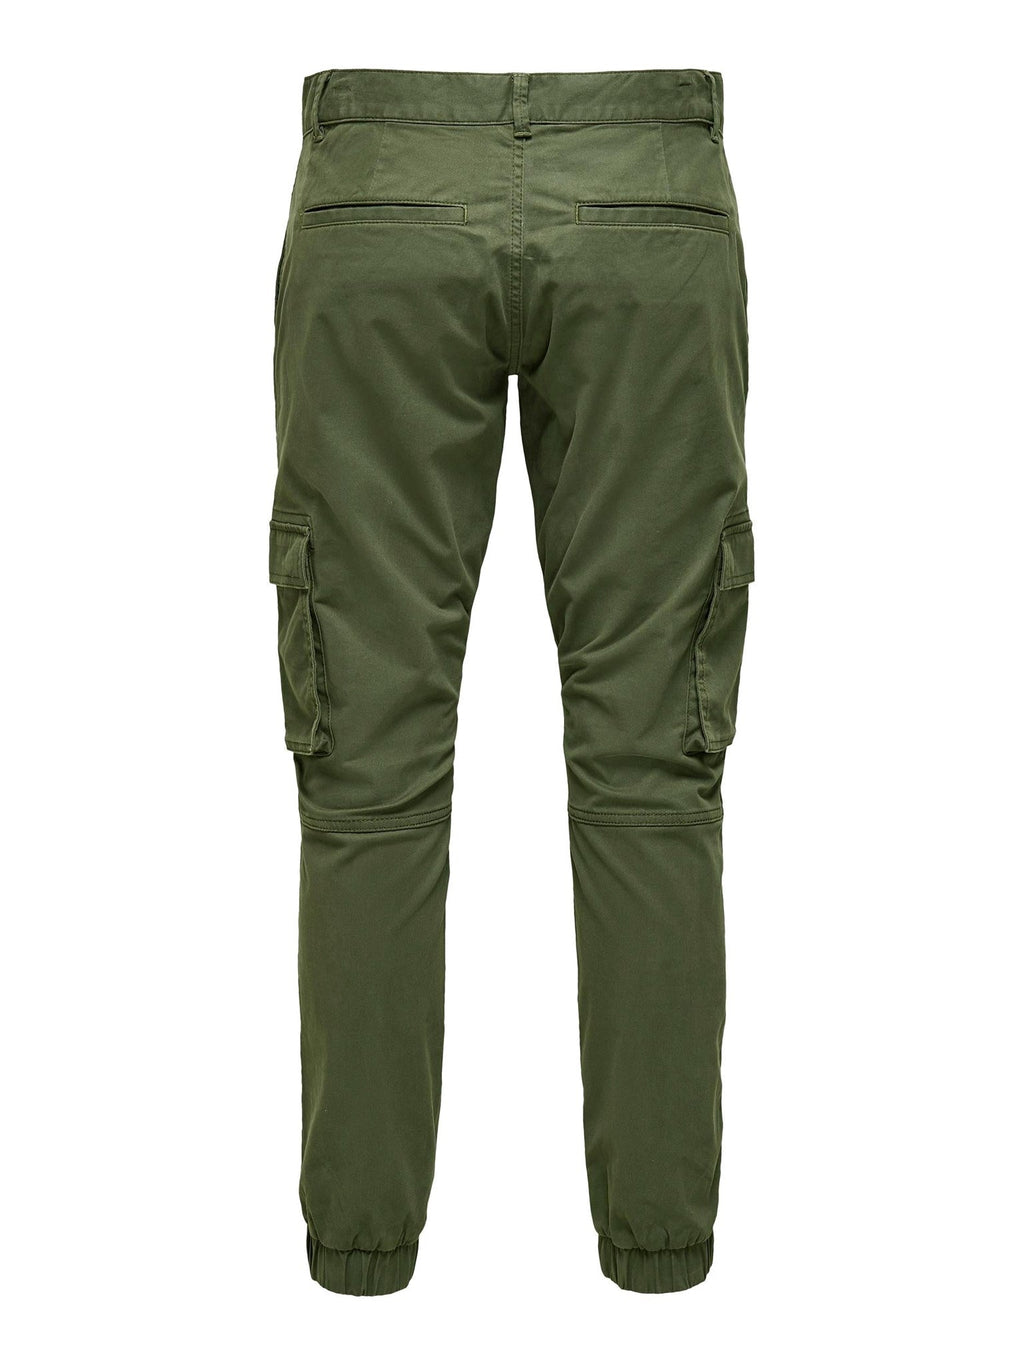 Cam Stage Cargo Pants - Olive Night